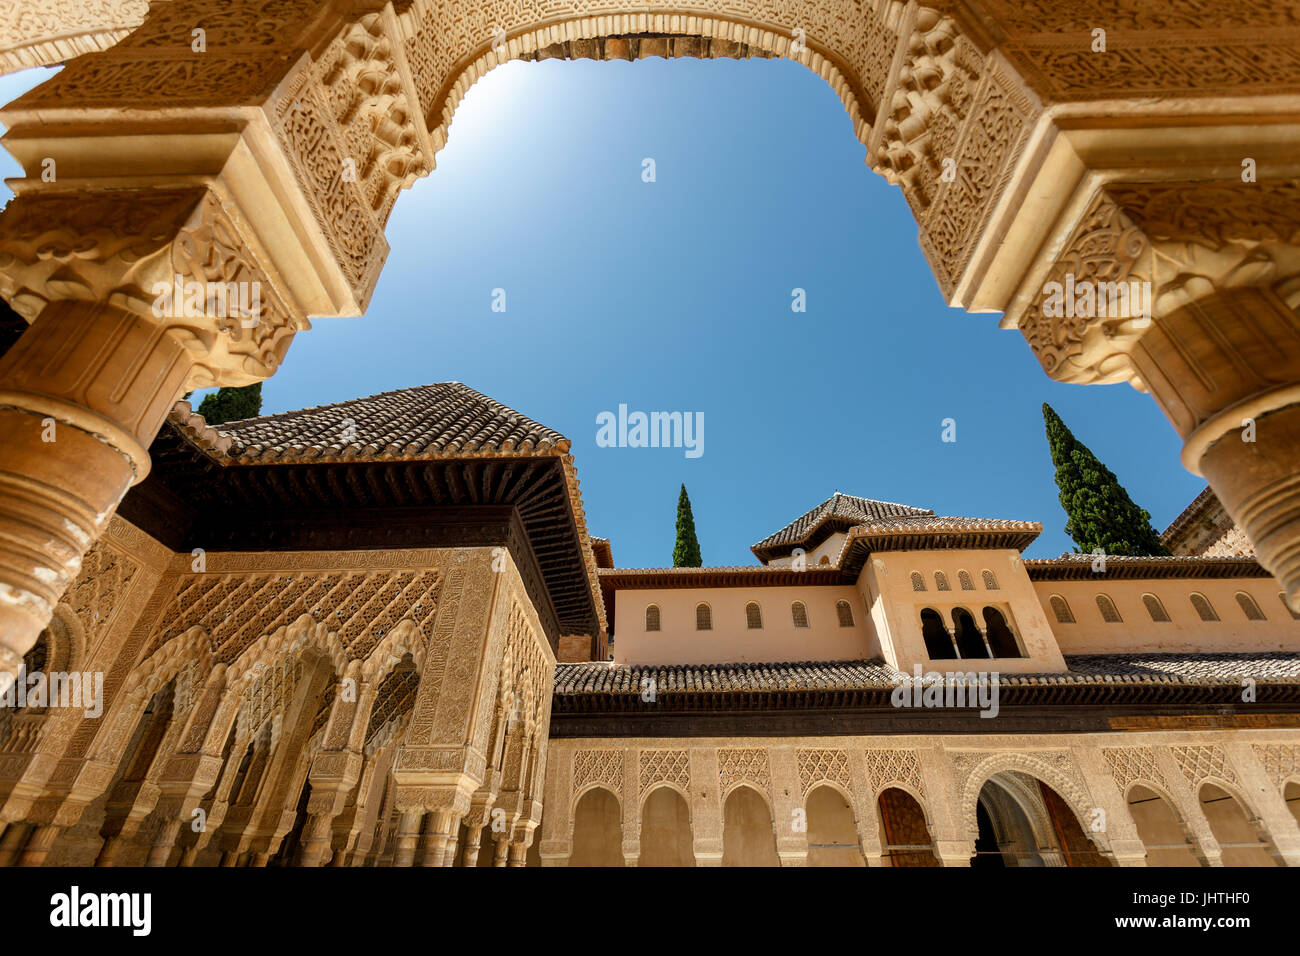 Palace of Alcazar, Famous Andalusian Architecture. Old Arab Palace in Seville, Spain. Ornamented Arch and Column. Famous travel destination. Stock Photo